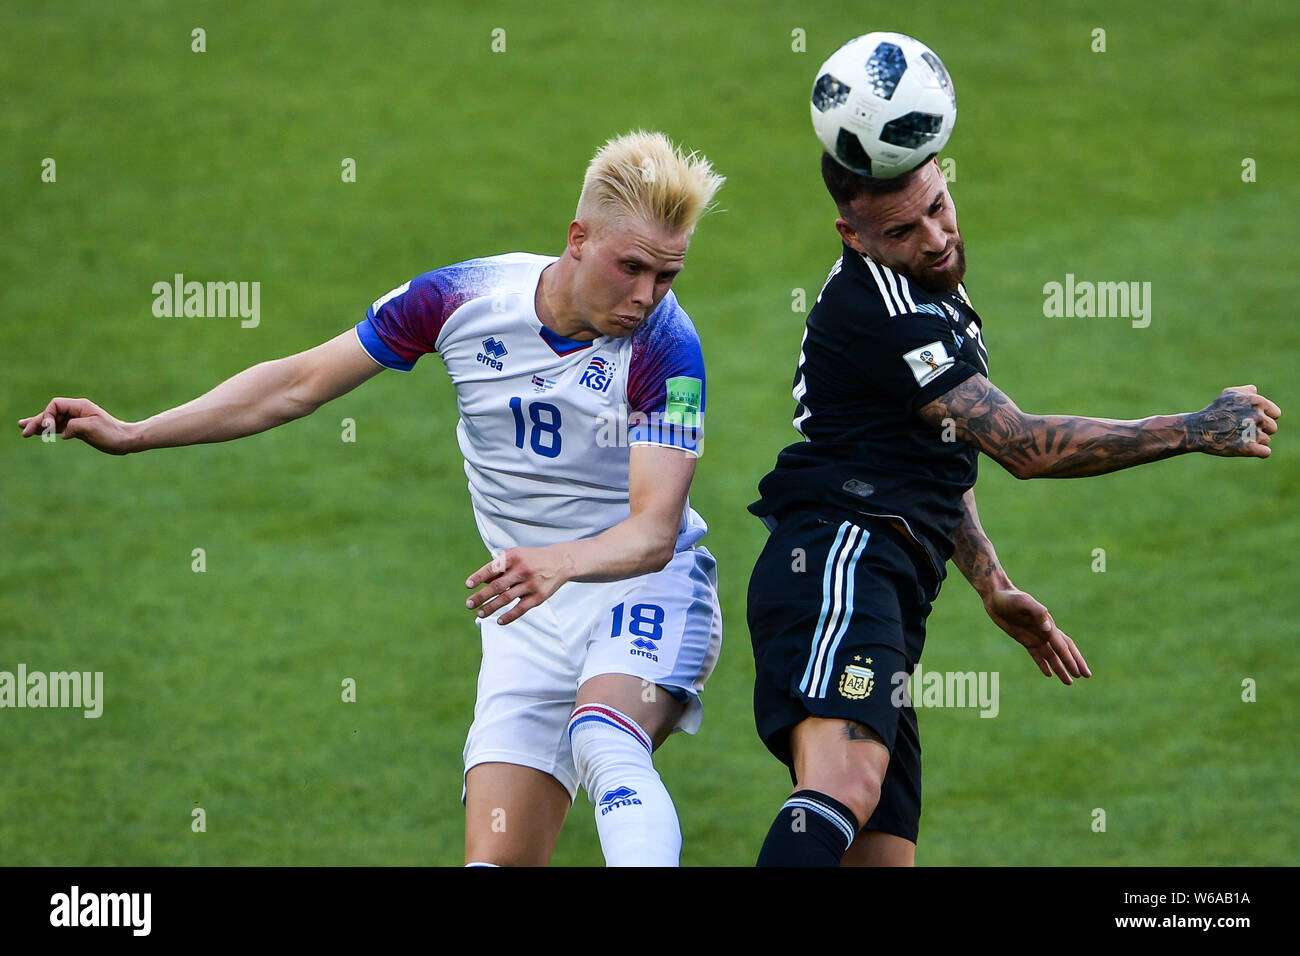 Nicolas Otamendi of Argentina, right, challenges Hordur Bjorgvin Magnusson of Iceland in their Group D match during the FIFA World Cup 2018 in Moscow, Stock Photo